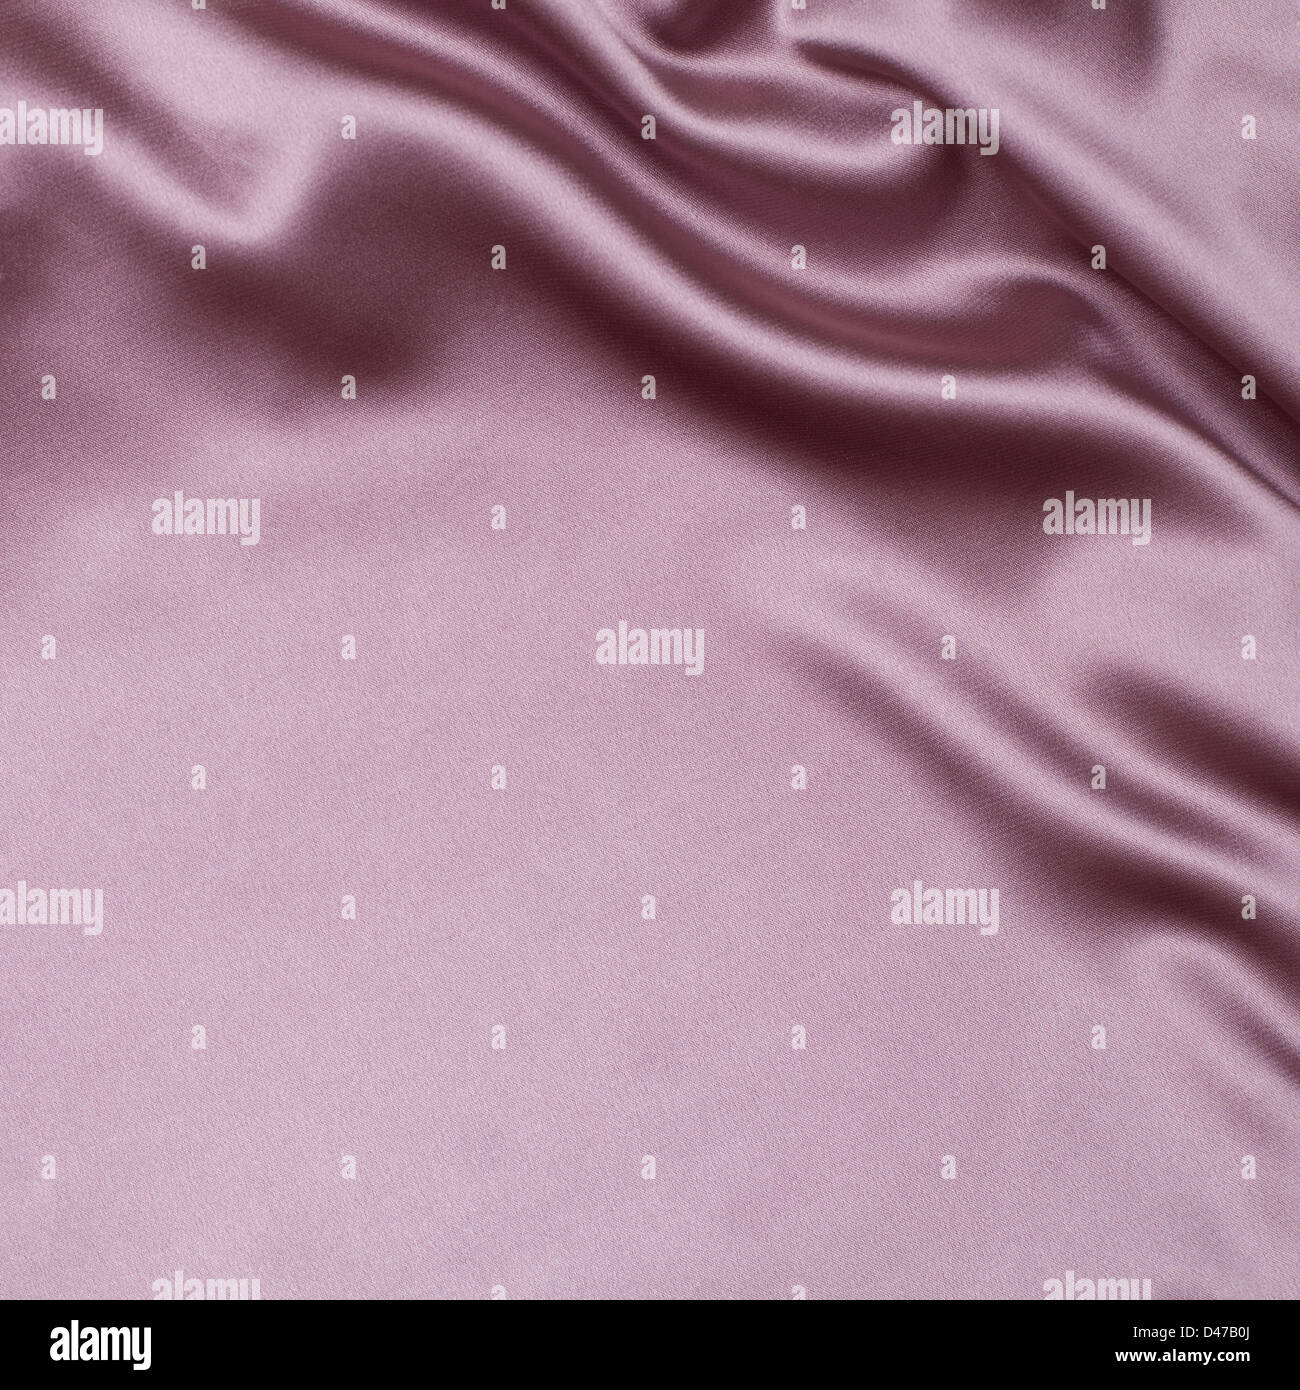 pink satin or silk fabric background Stock Photo